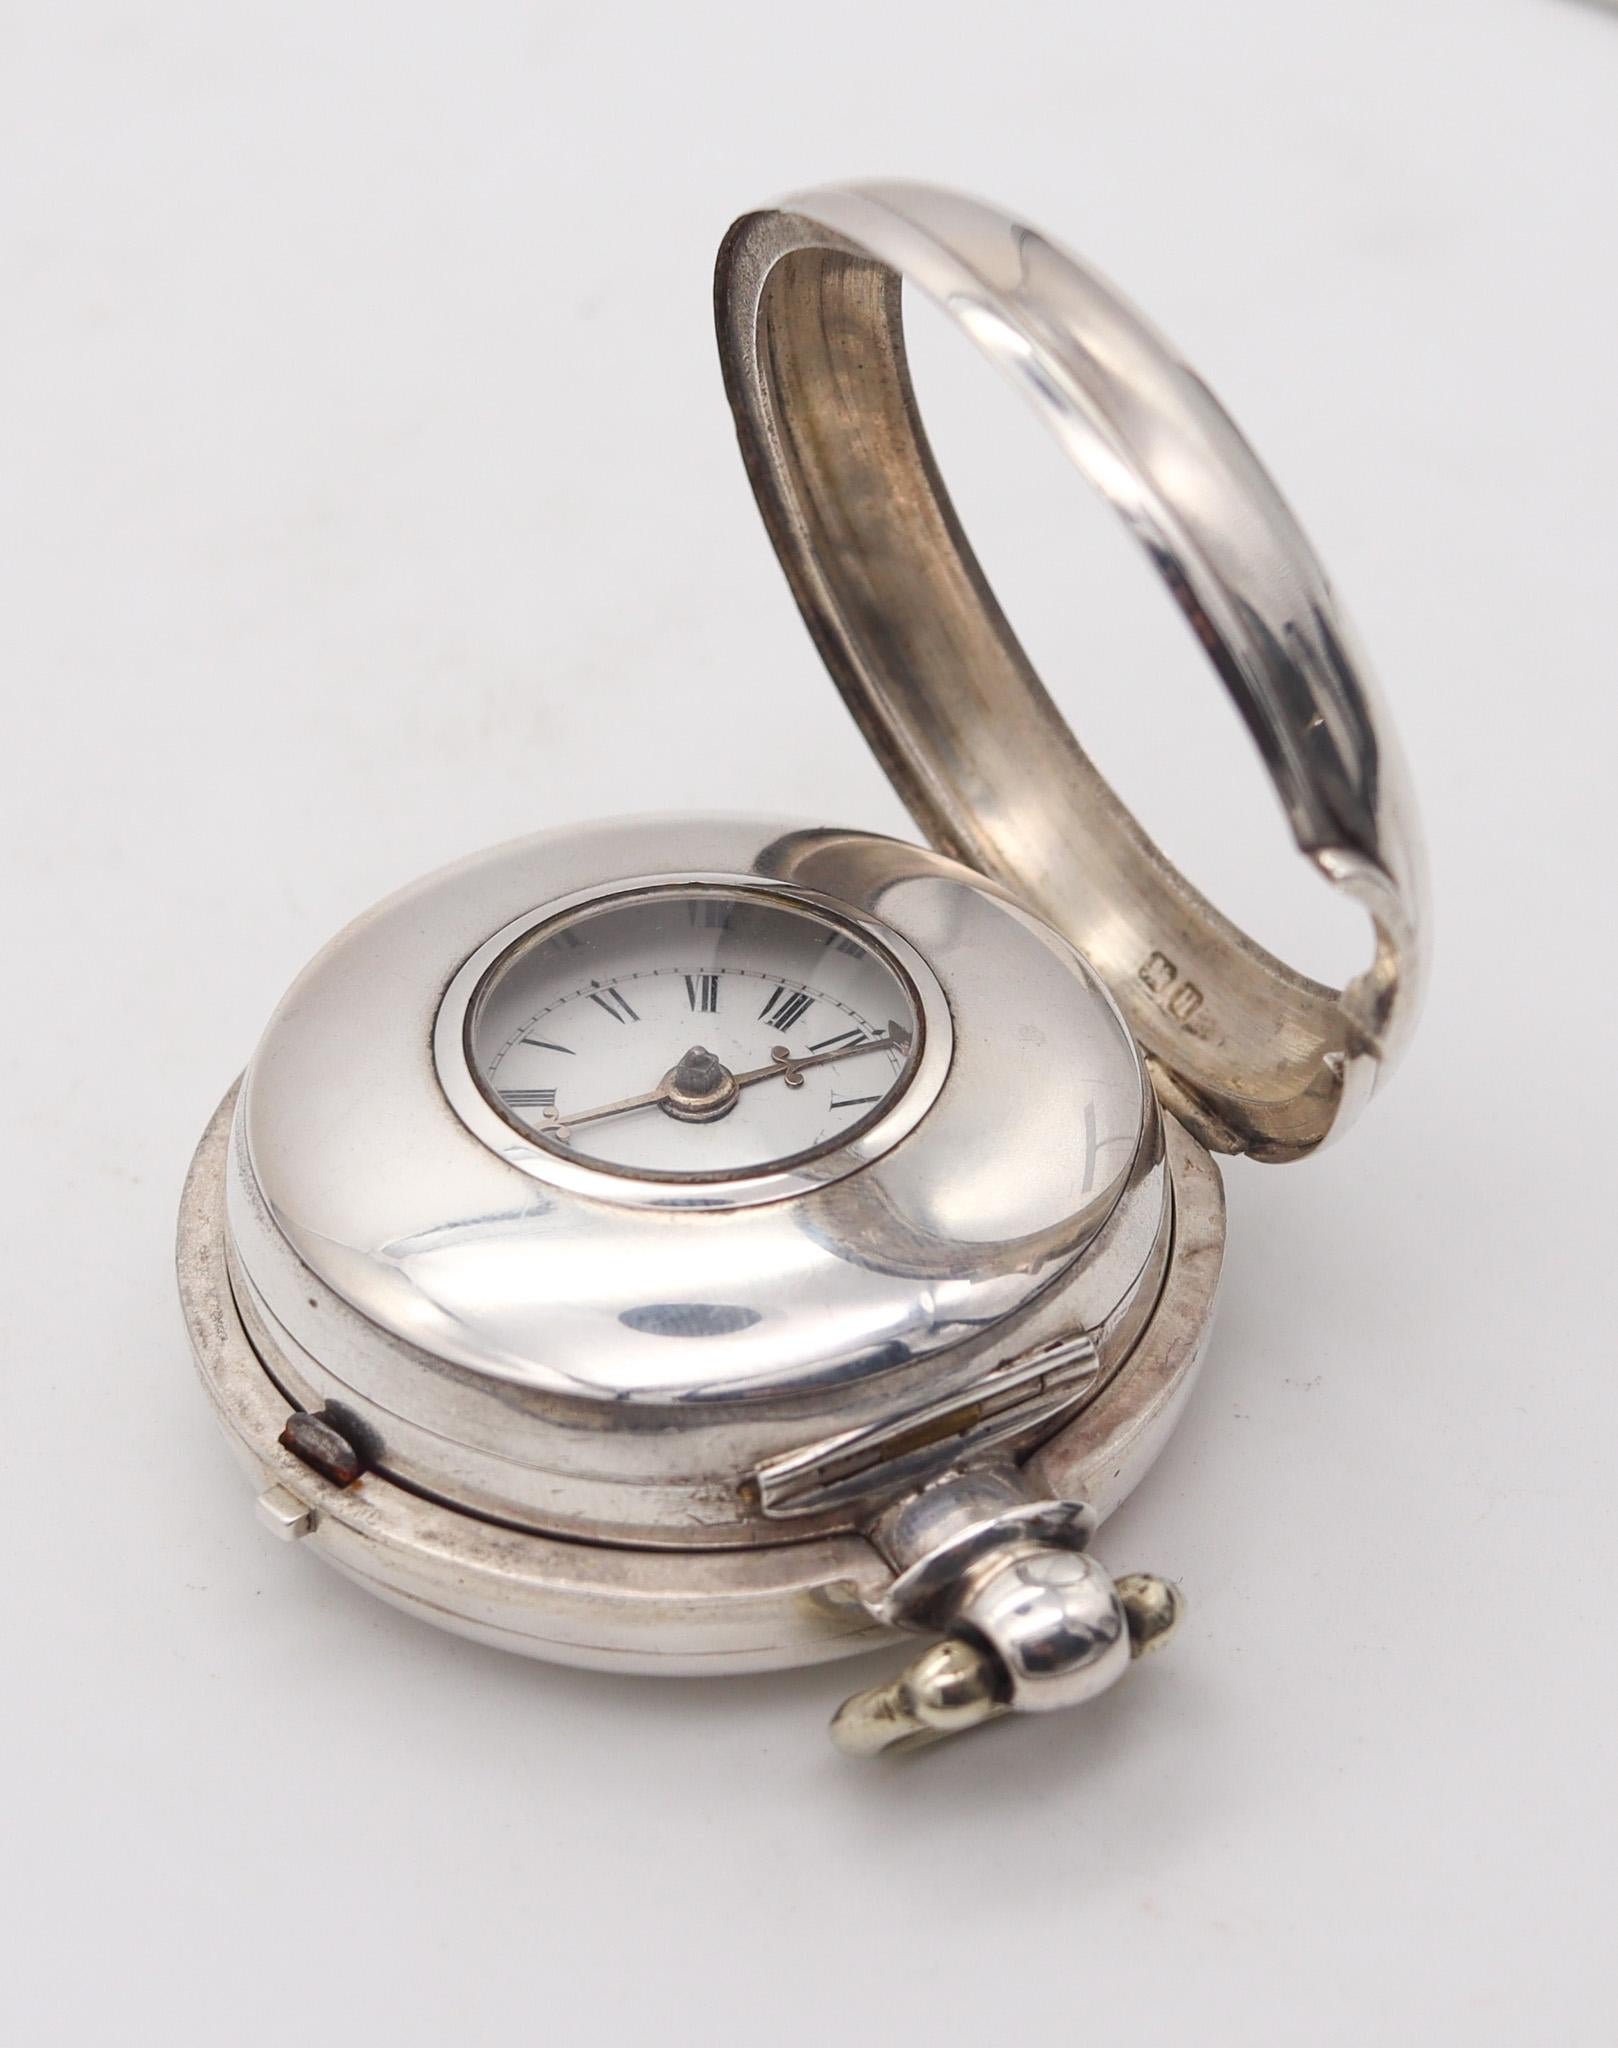 Evans Shrewsbury 1763-1856 Sterling Pair Cases Fusee Demi Hunter Pocket Watch  In Excellent Condition For Sale In Miami, FL